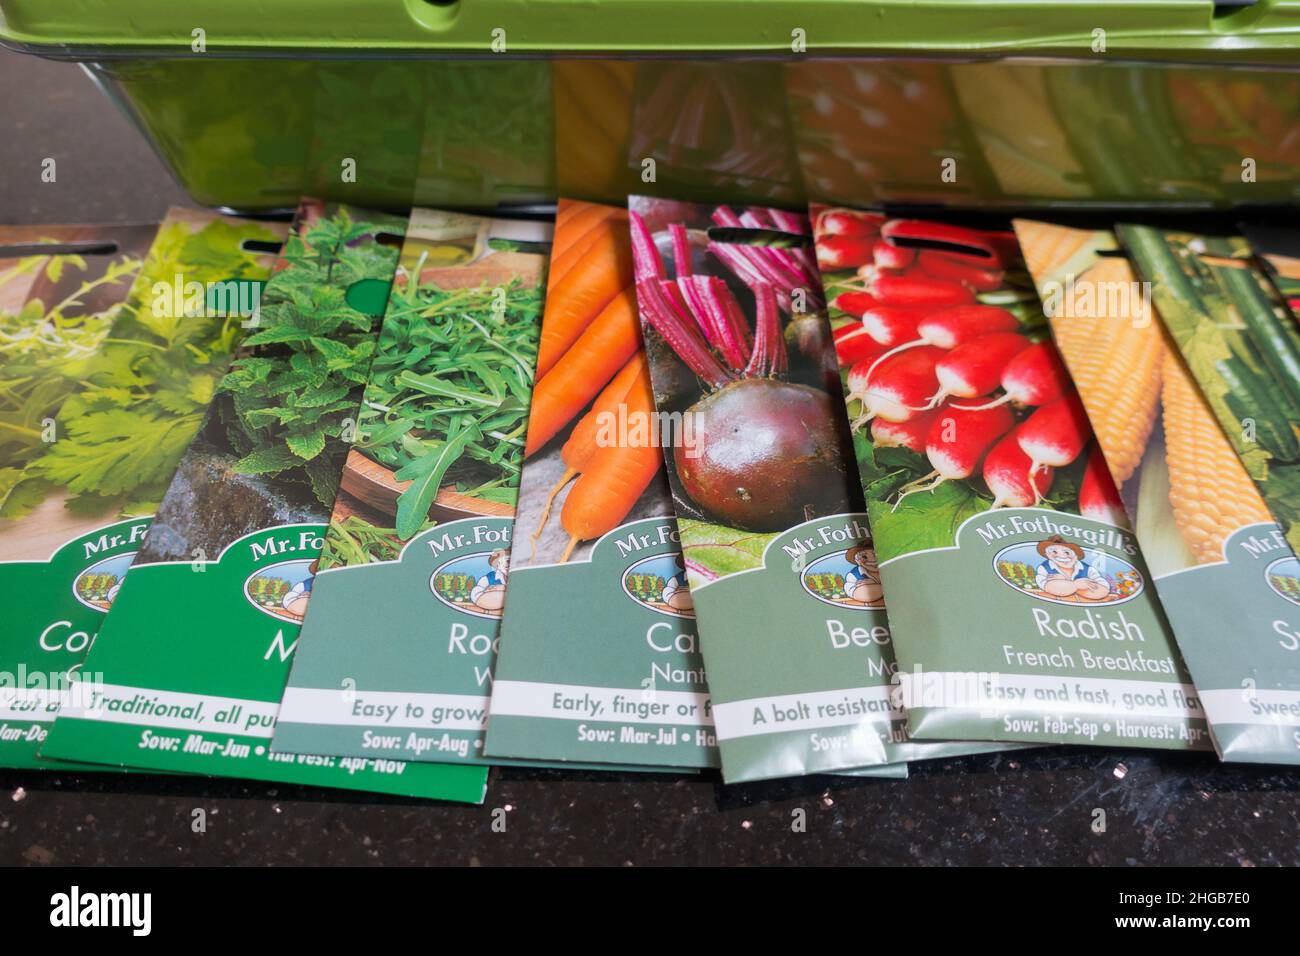 Seed packets made and sold by Mr. Fothergill's Stock Photo